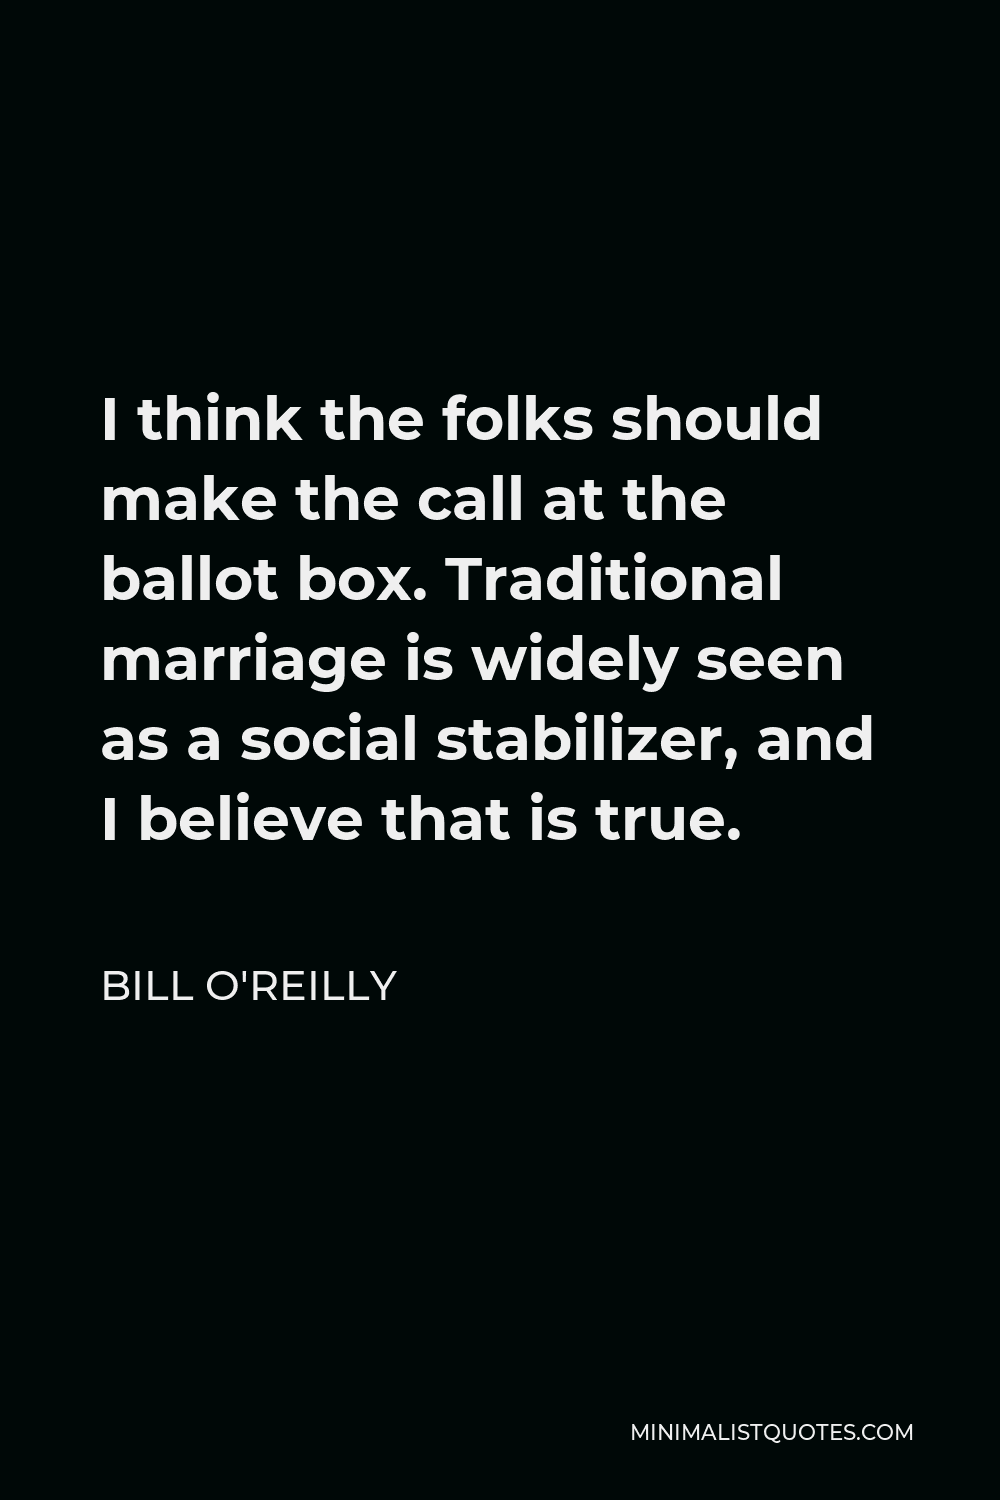 Bill O'Reilly Quote - I think the folks should make the call at the ballot box. Traditional marriage is widely seen as a social stabilizer, and I believe that is true.